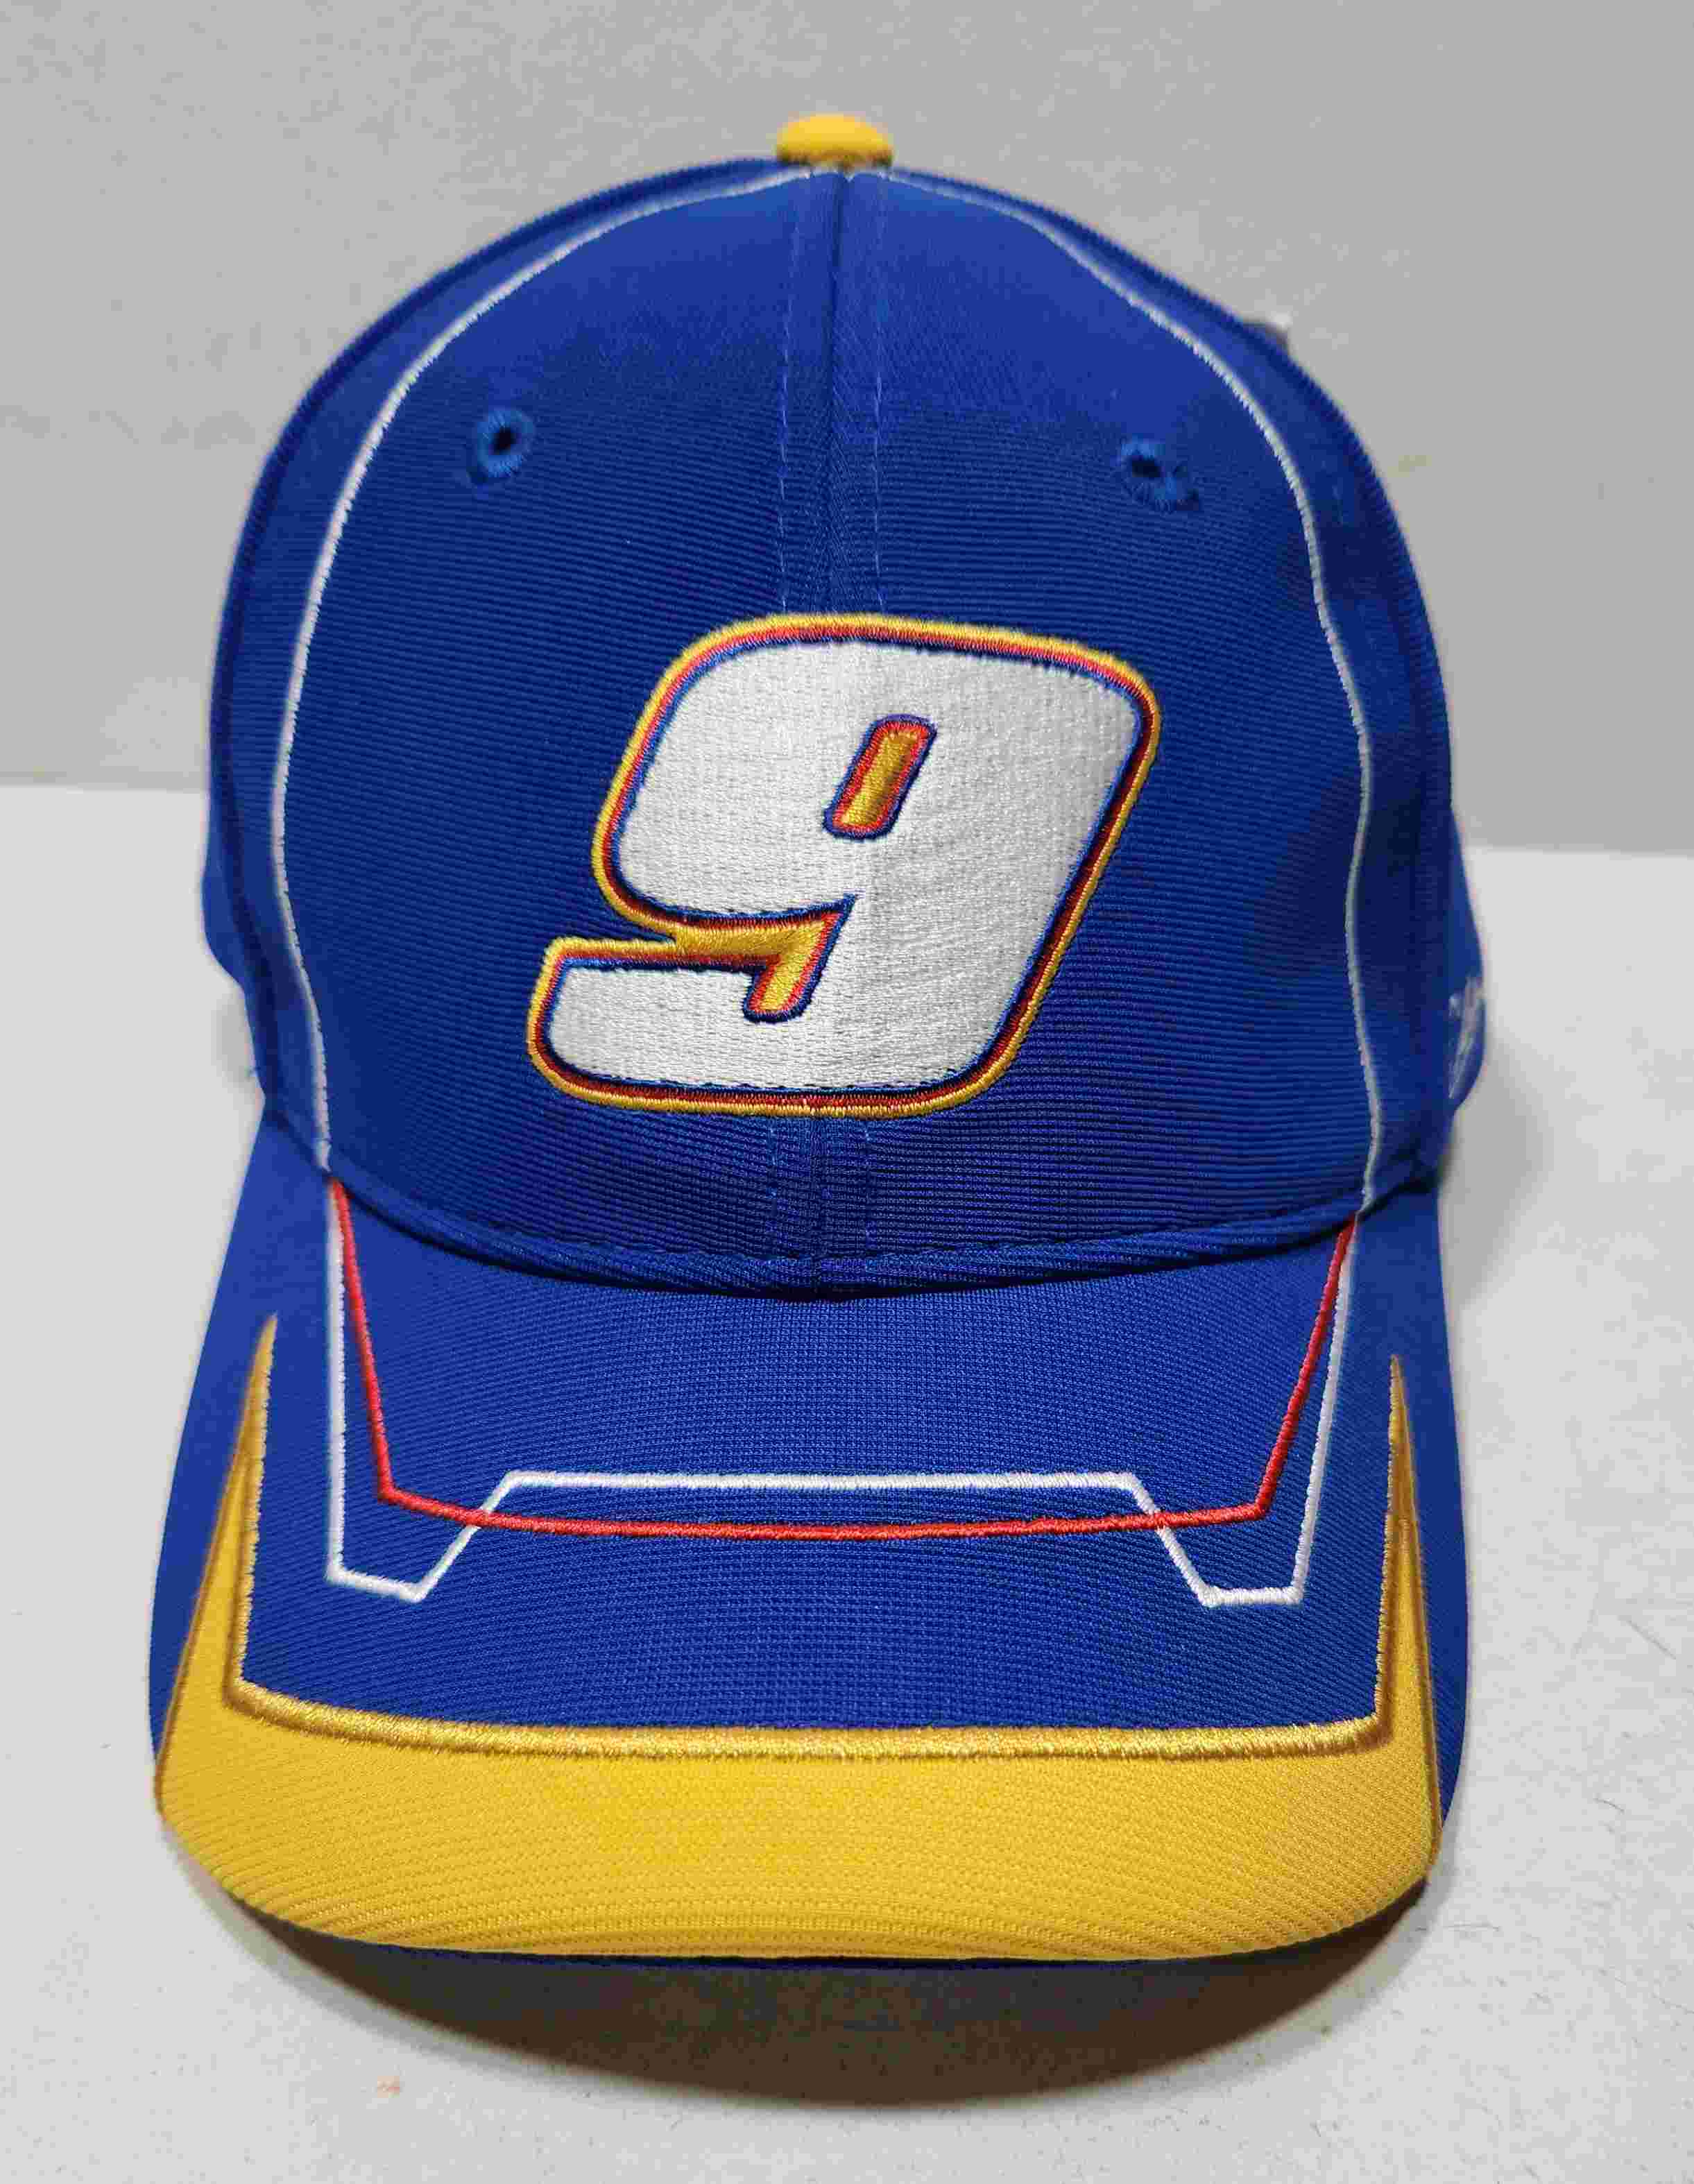 2014 Chase Elliott NAPA "Element""Nationwide Series" hat by Chase Authentics